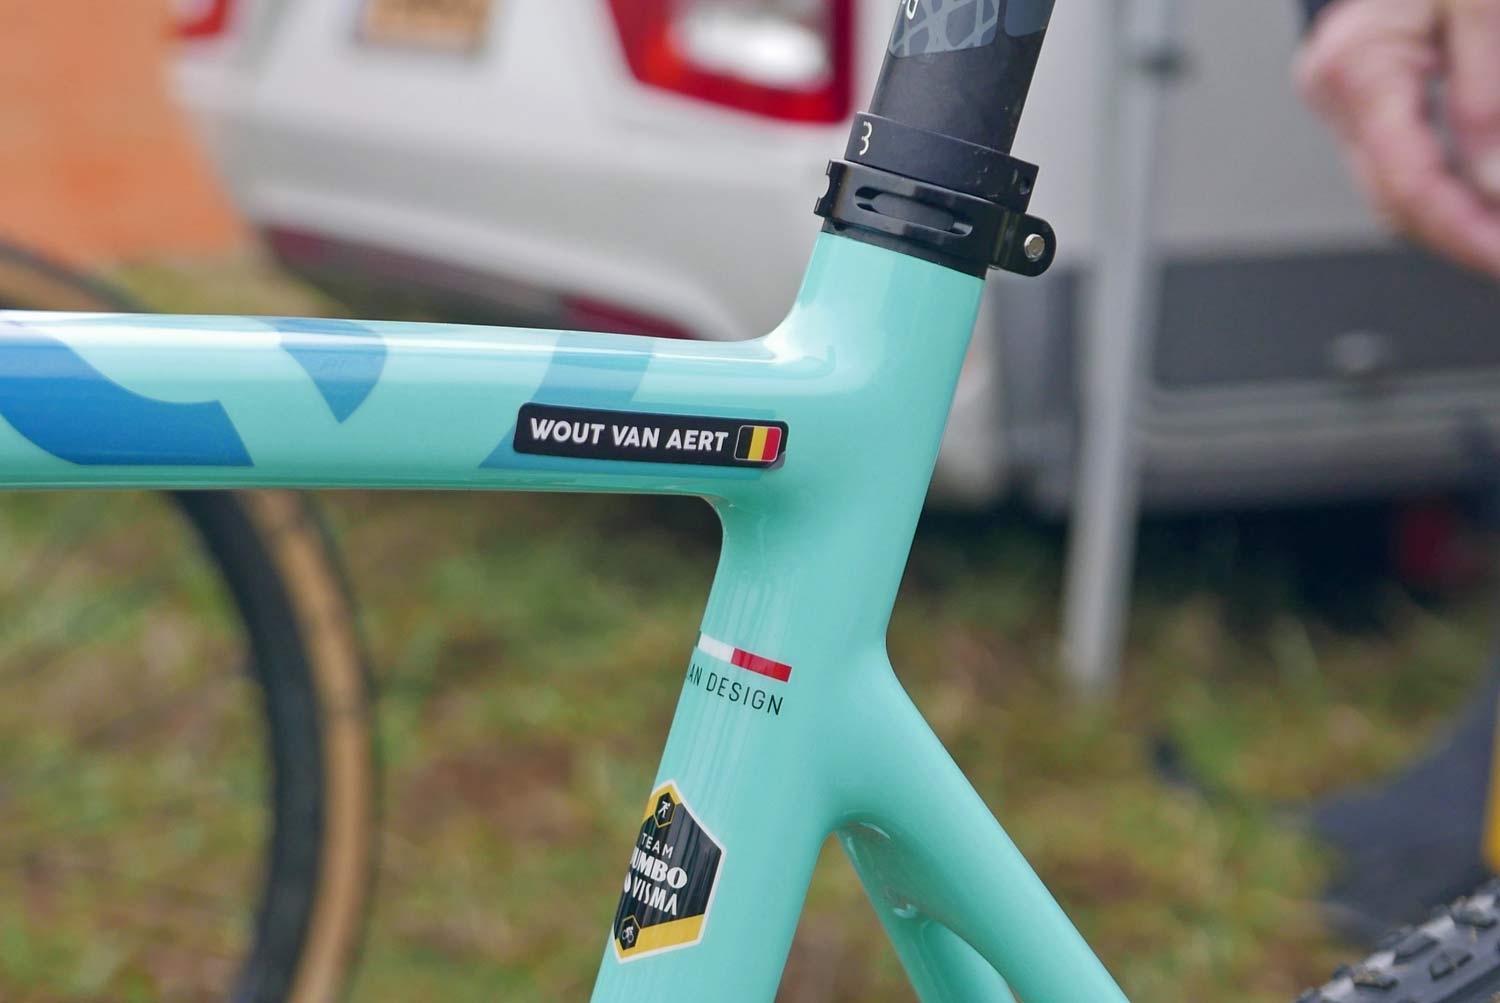 CX Pro Bike Check: Bianchi Zolder Pro carbon cyclocross bike, Wout van Aert at UCI Cyclo-Cross World Cup Tabor, extra seatpost clamp